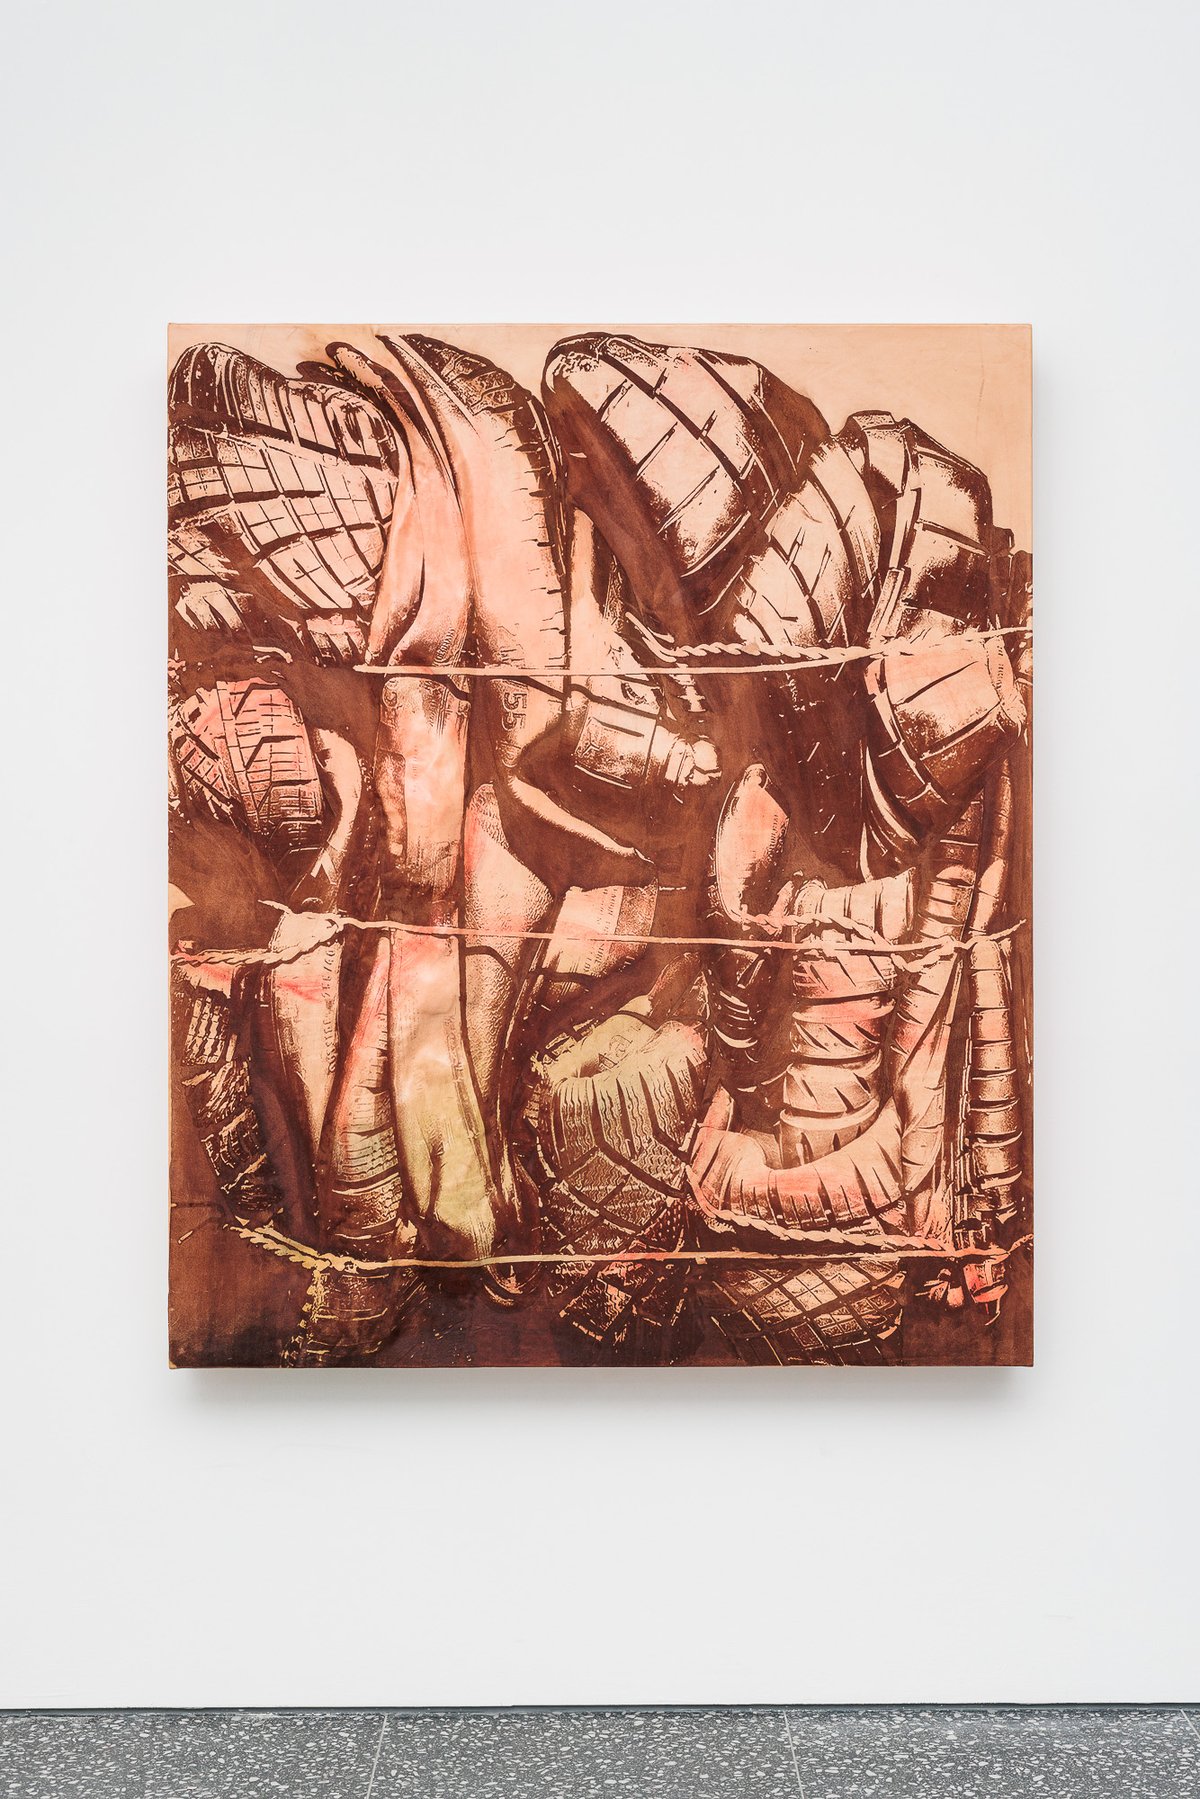 Lena HenkeCombustions 20 [Tread failure], 2024Laser etched leather, pigment on wooden panel150 x 125 x 15 cm